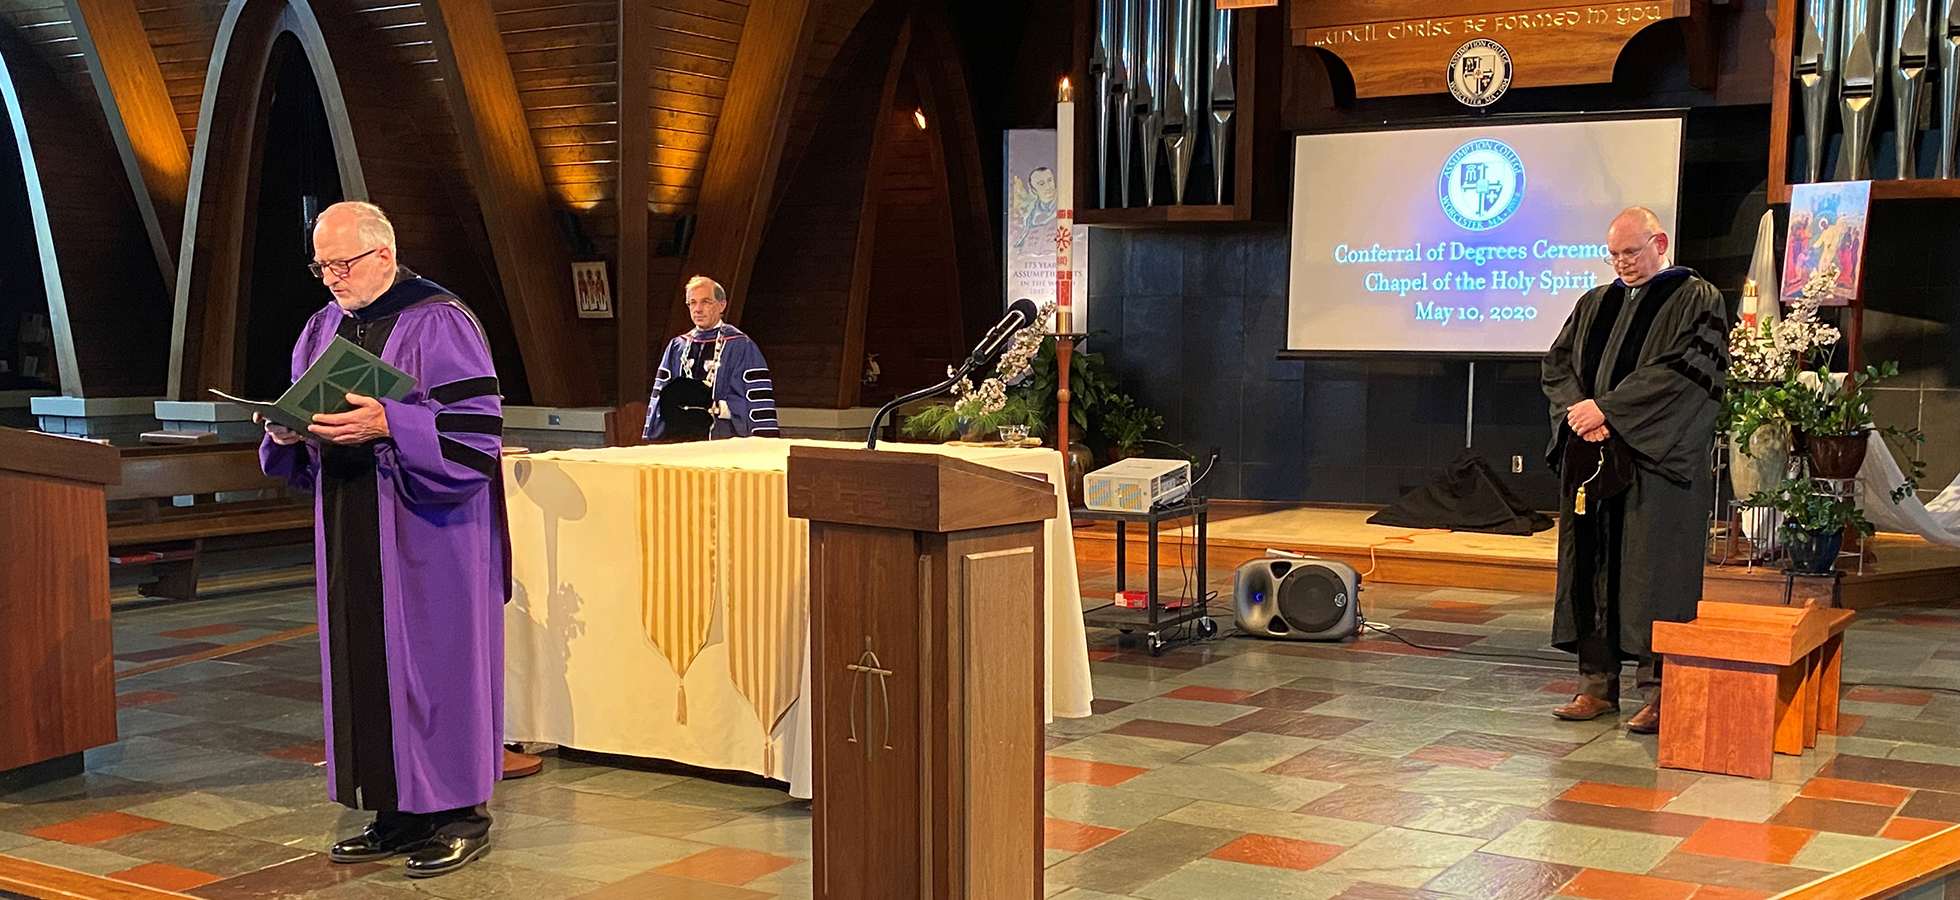 Father Richard Lamoureux, A.A., Ph.D., Vice President for Mission delivers the benediction at the Conferral of Degrees ceremony held in the Chapel of the Holy Spirit. Behind Fr. Lamoureux is College President Francesco C. Cesareo, Ph.D., and Provost Greg Weiner, Ph.D.